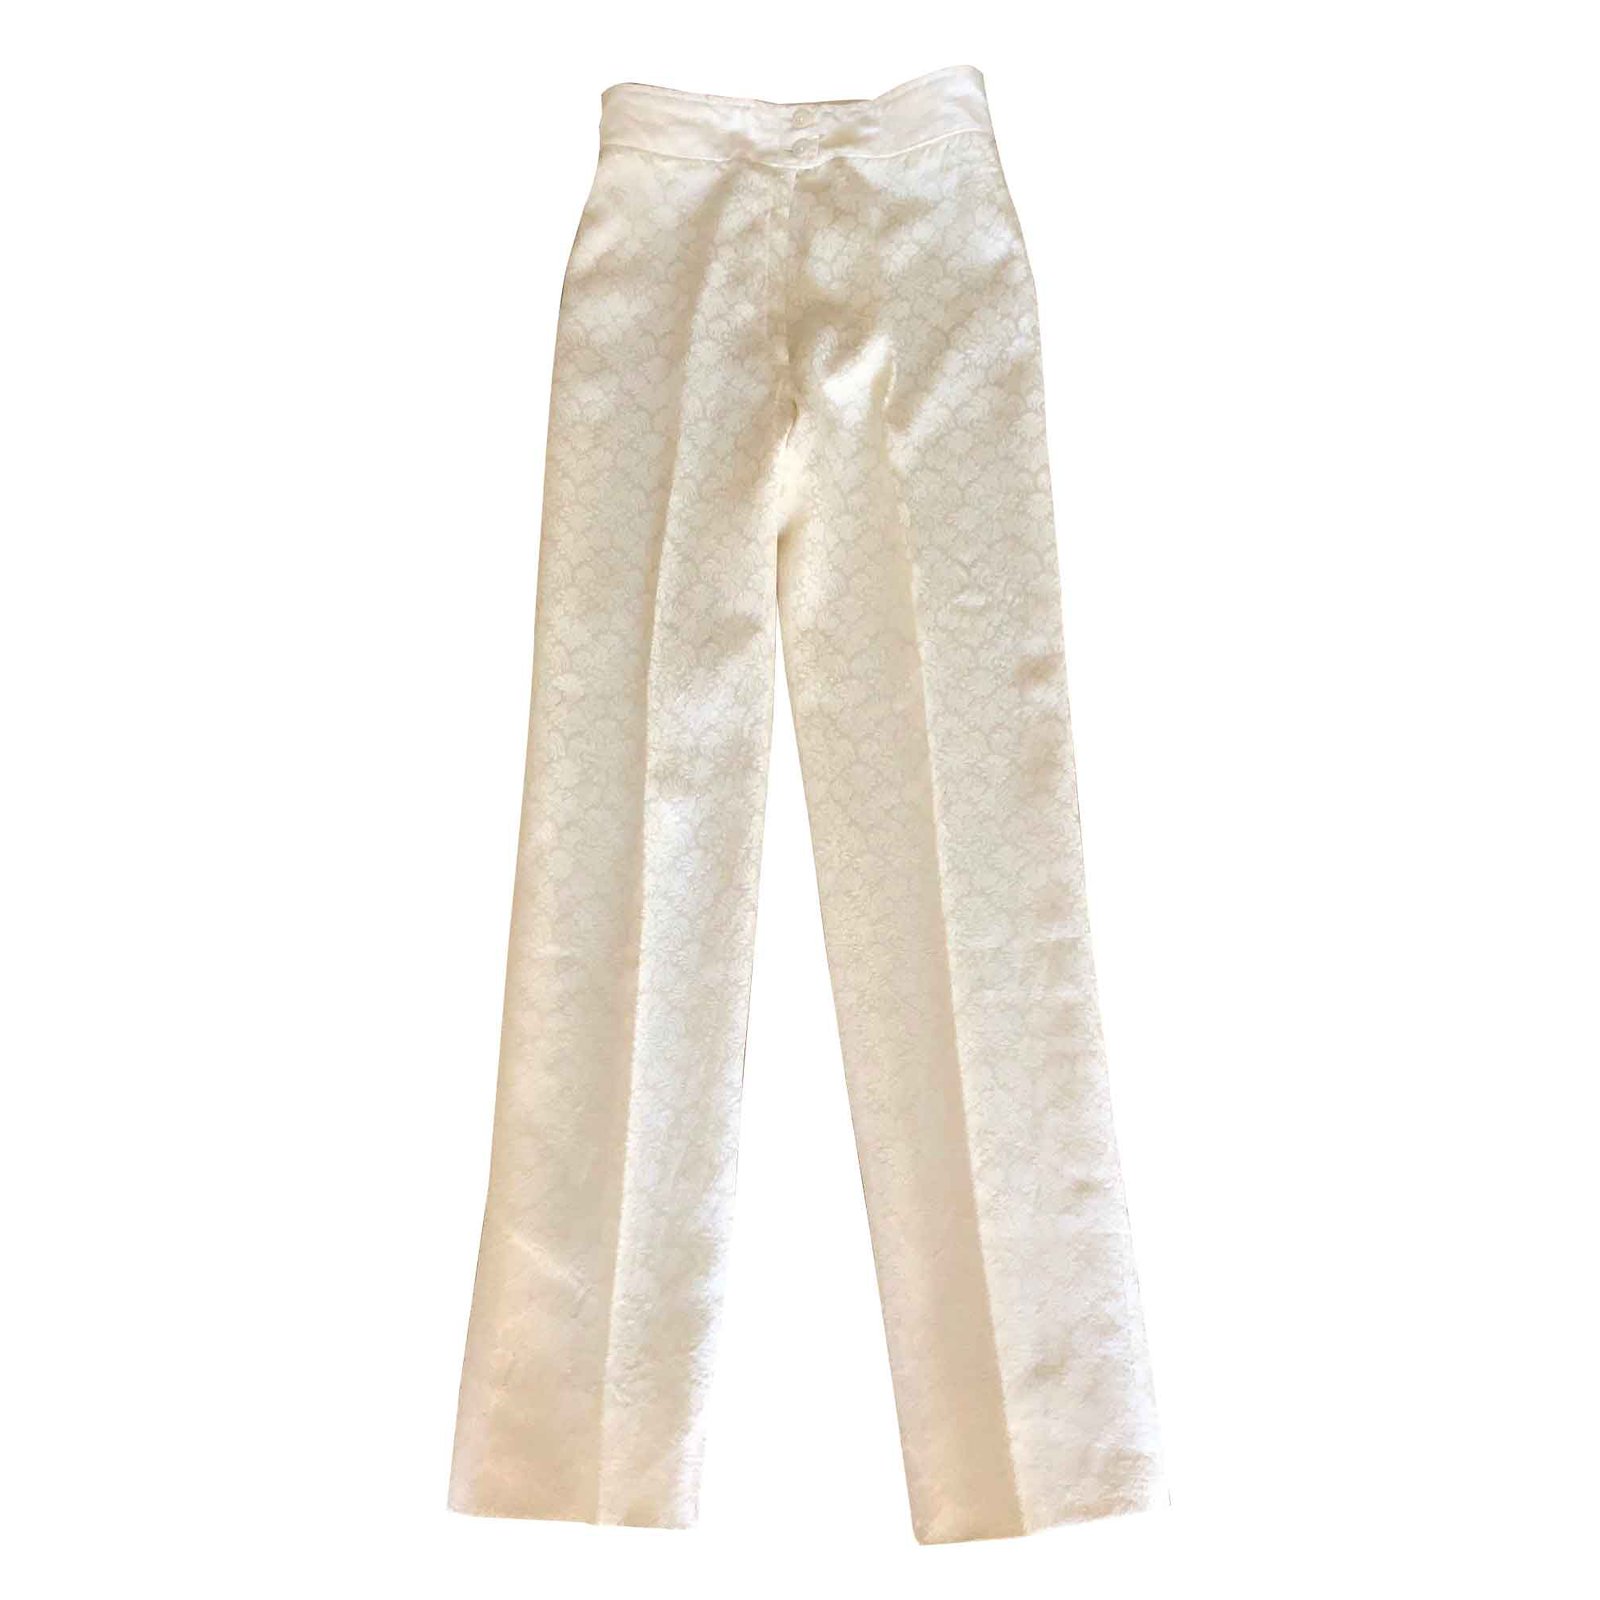 Off White Raw Silk Screen Printed Trousers TR-22-133